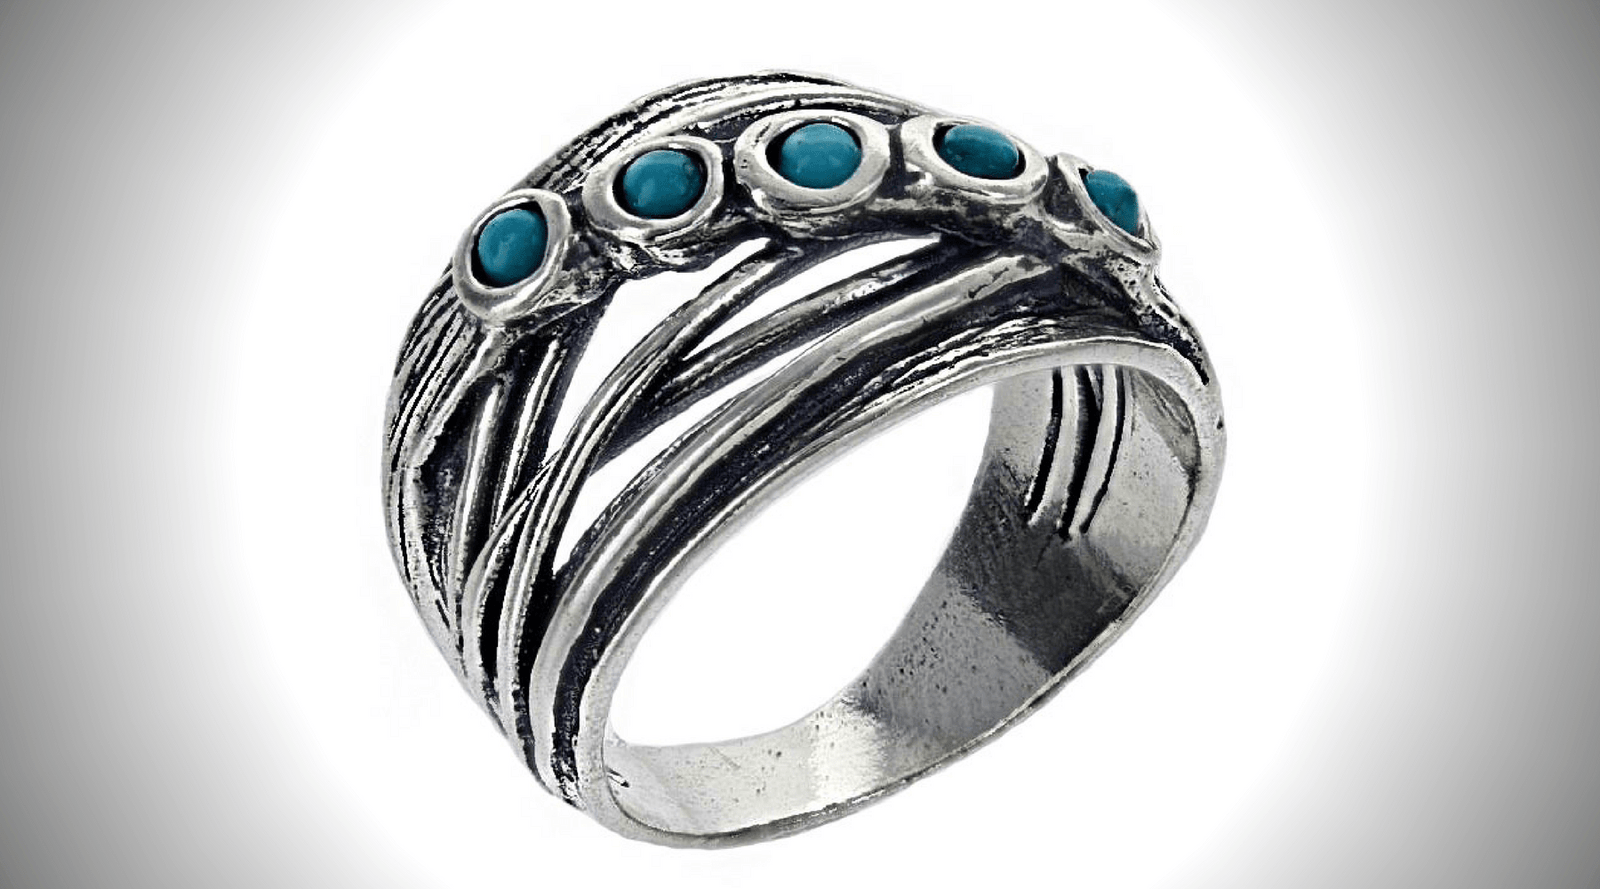 Vintage Sterling Silver Dark Ring With Onyx Stone Unique, 57% OFF